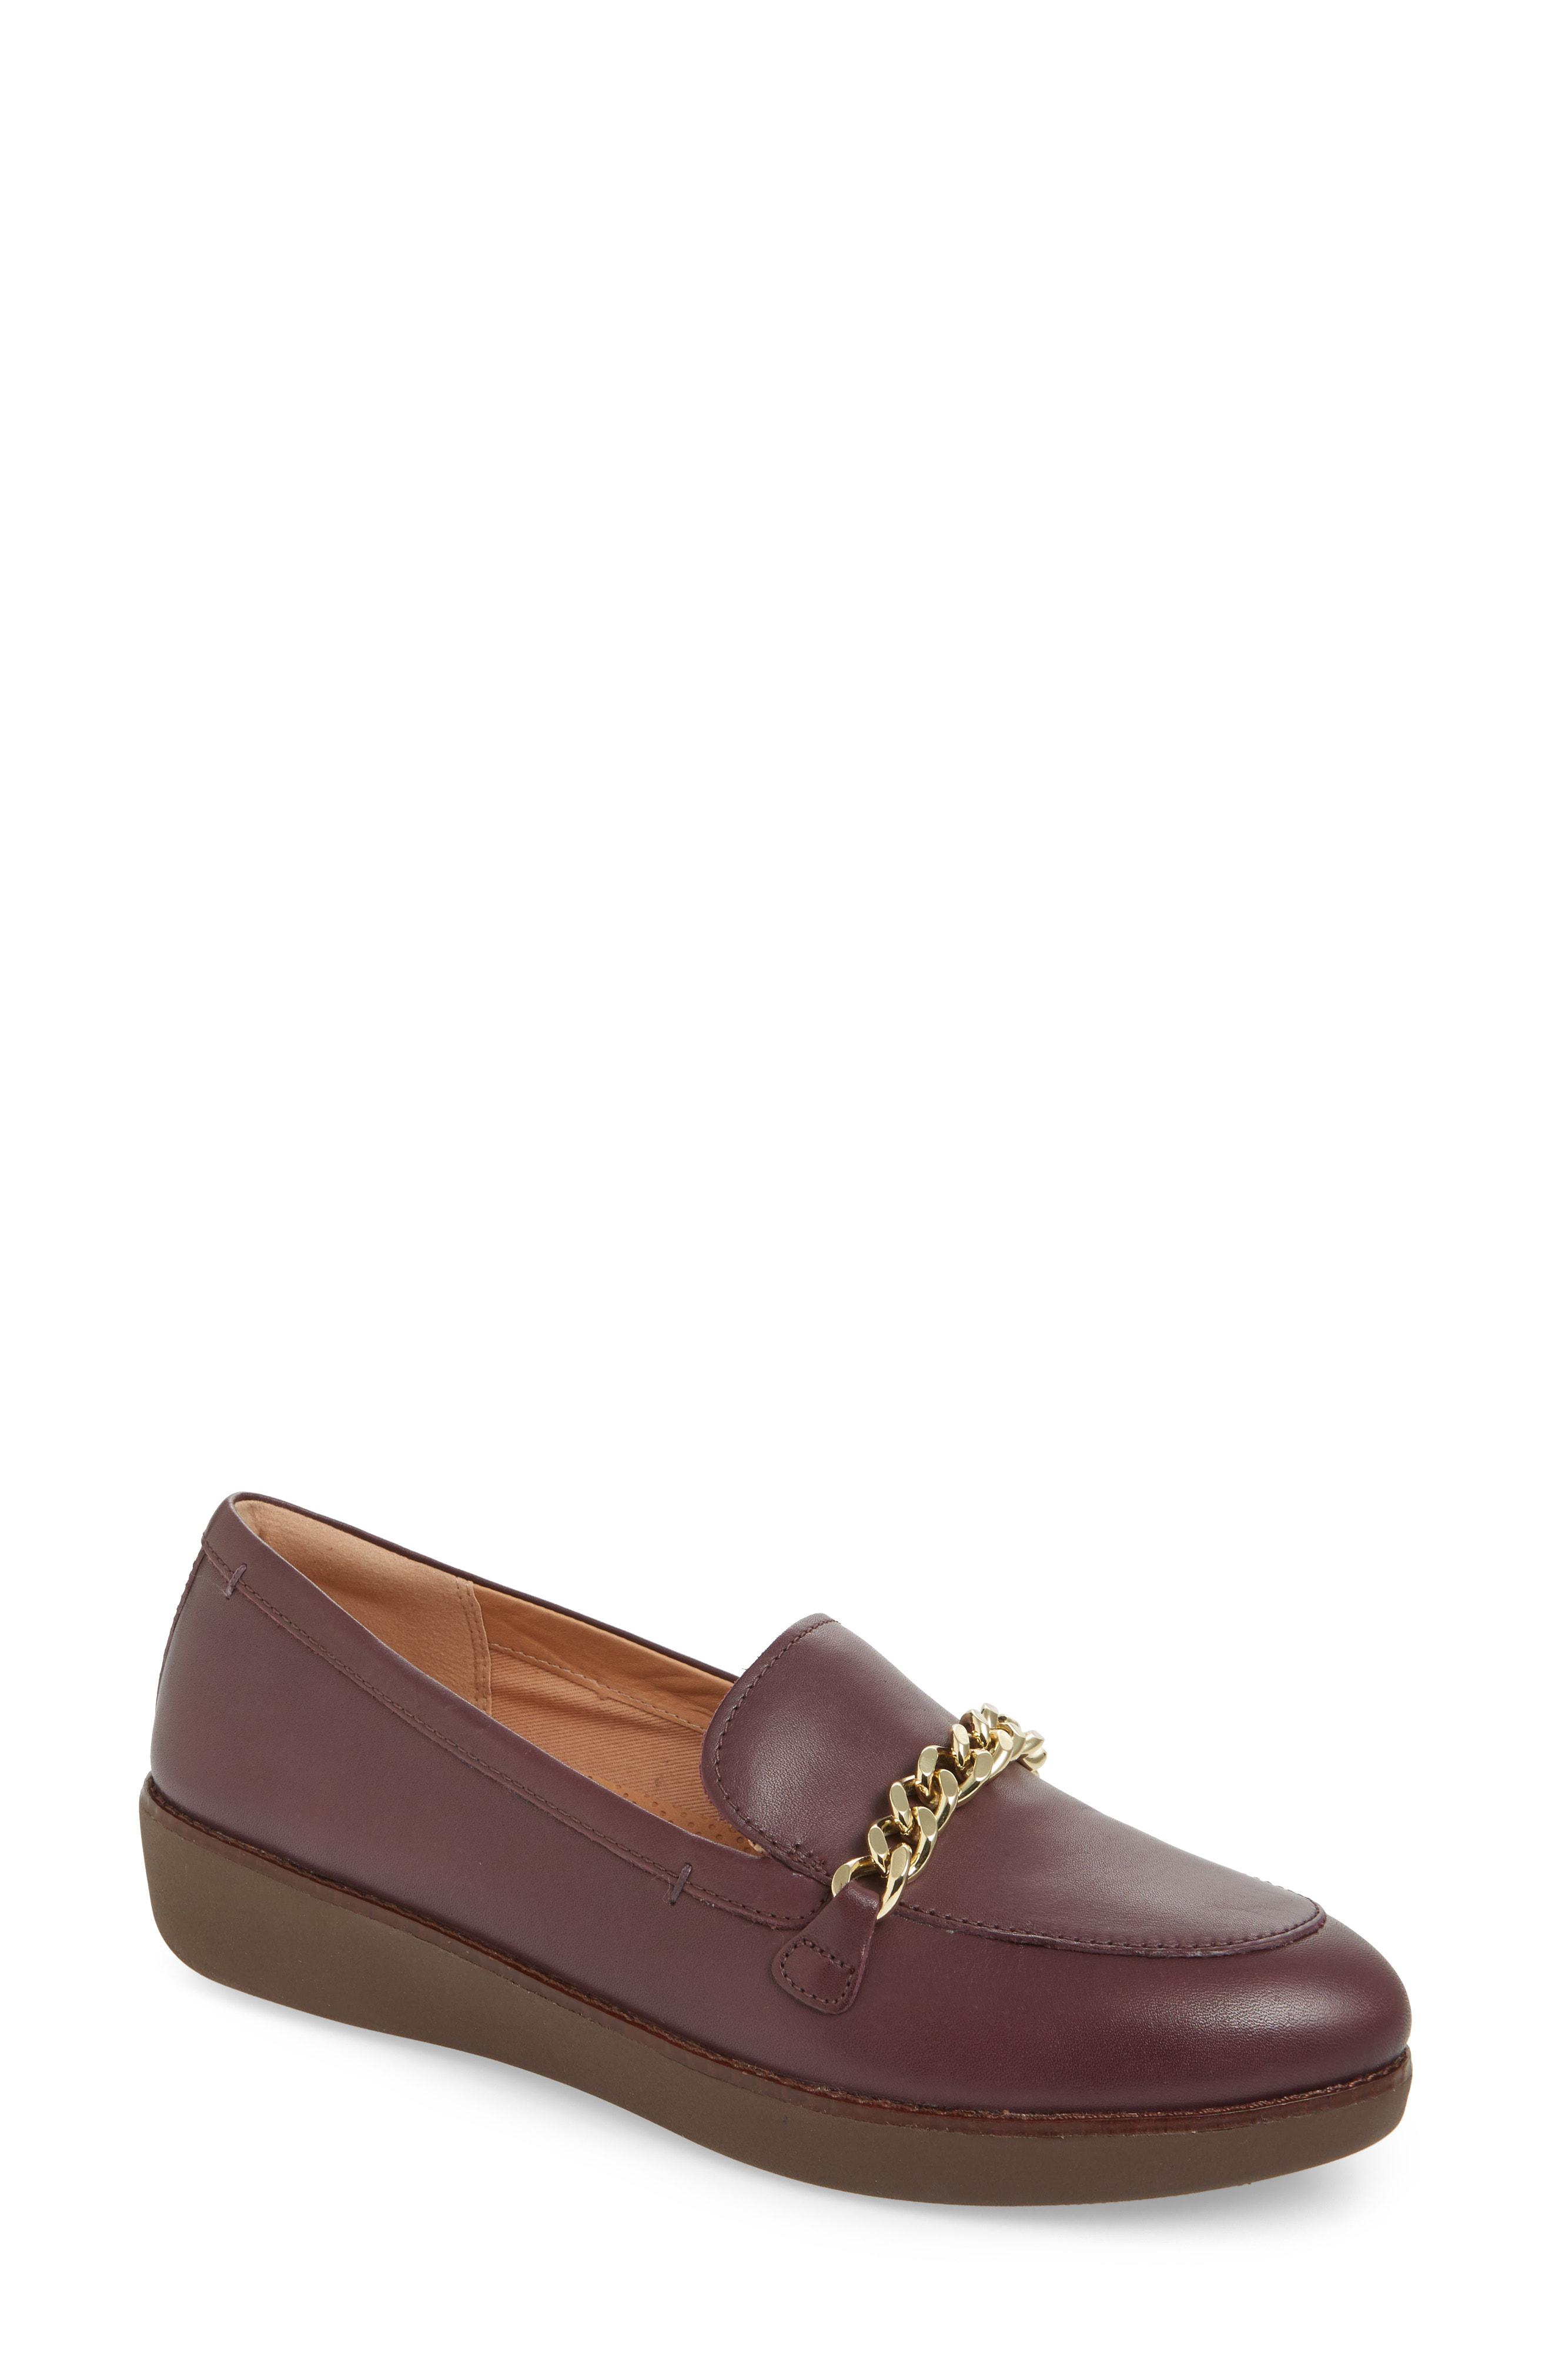 Fitflop Petrina Chain Loafer in 